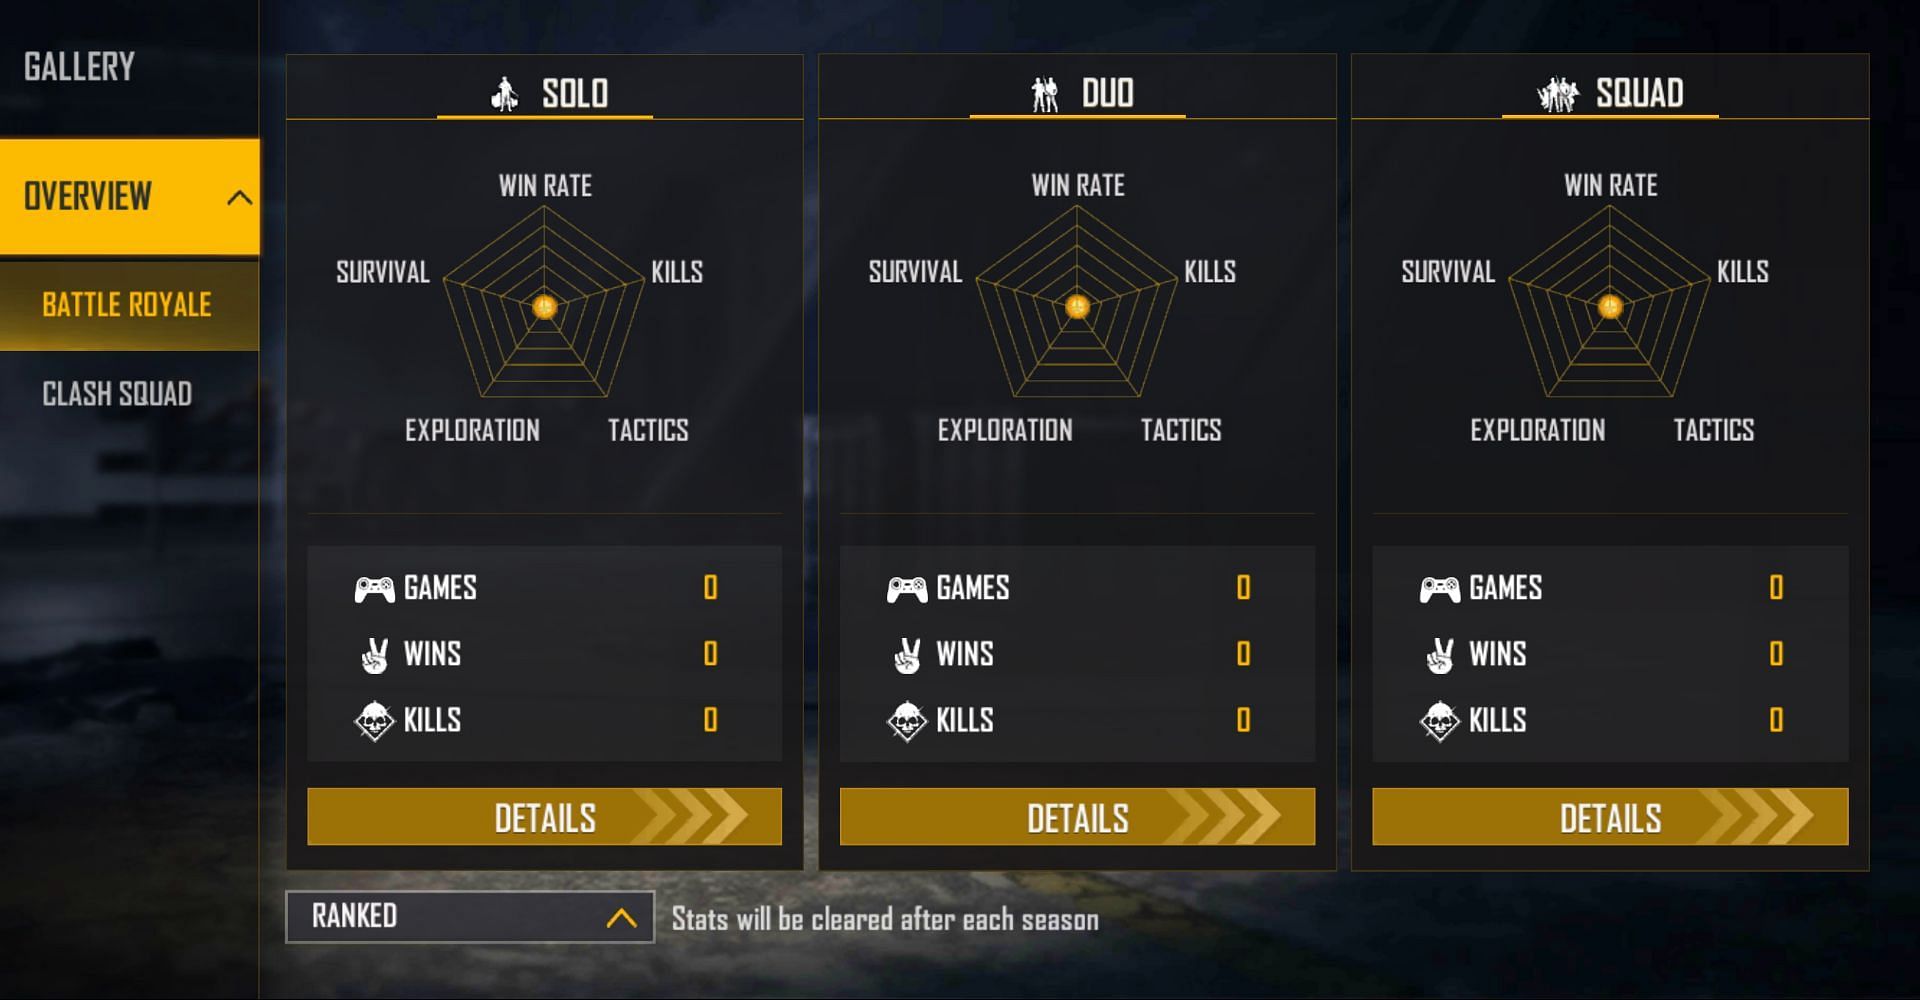 He has not contested in the ranked games (Image via Free Fire)